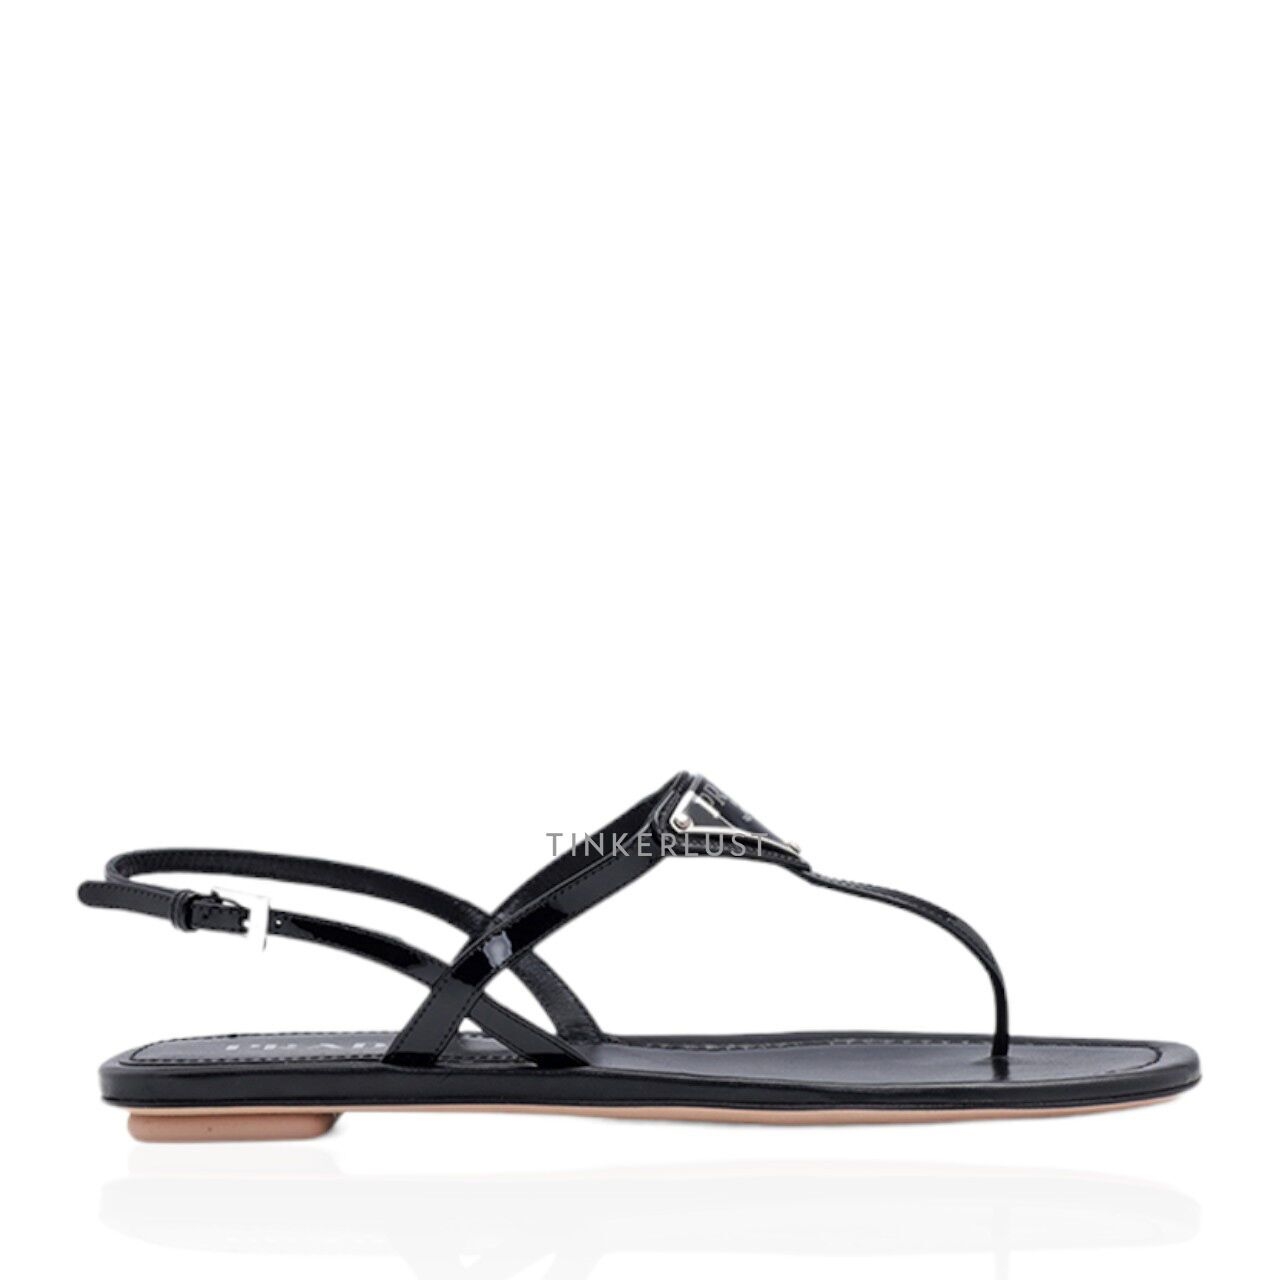 PRADA Thong Sandals in Black Patent with Triangle Logo